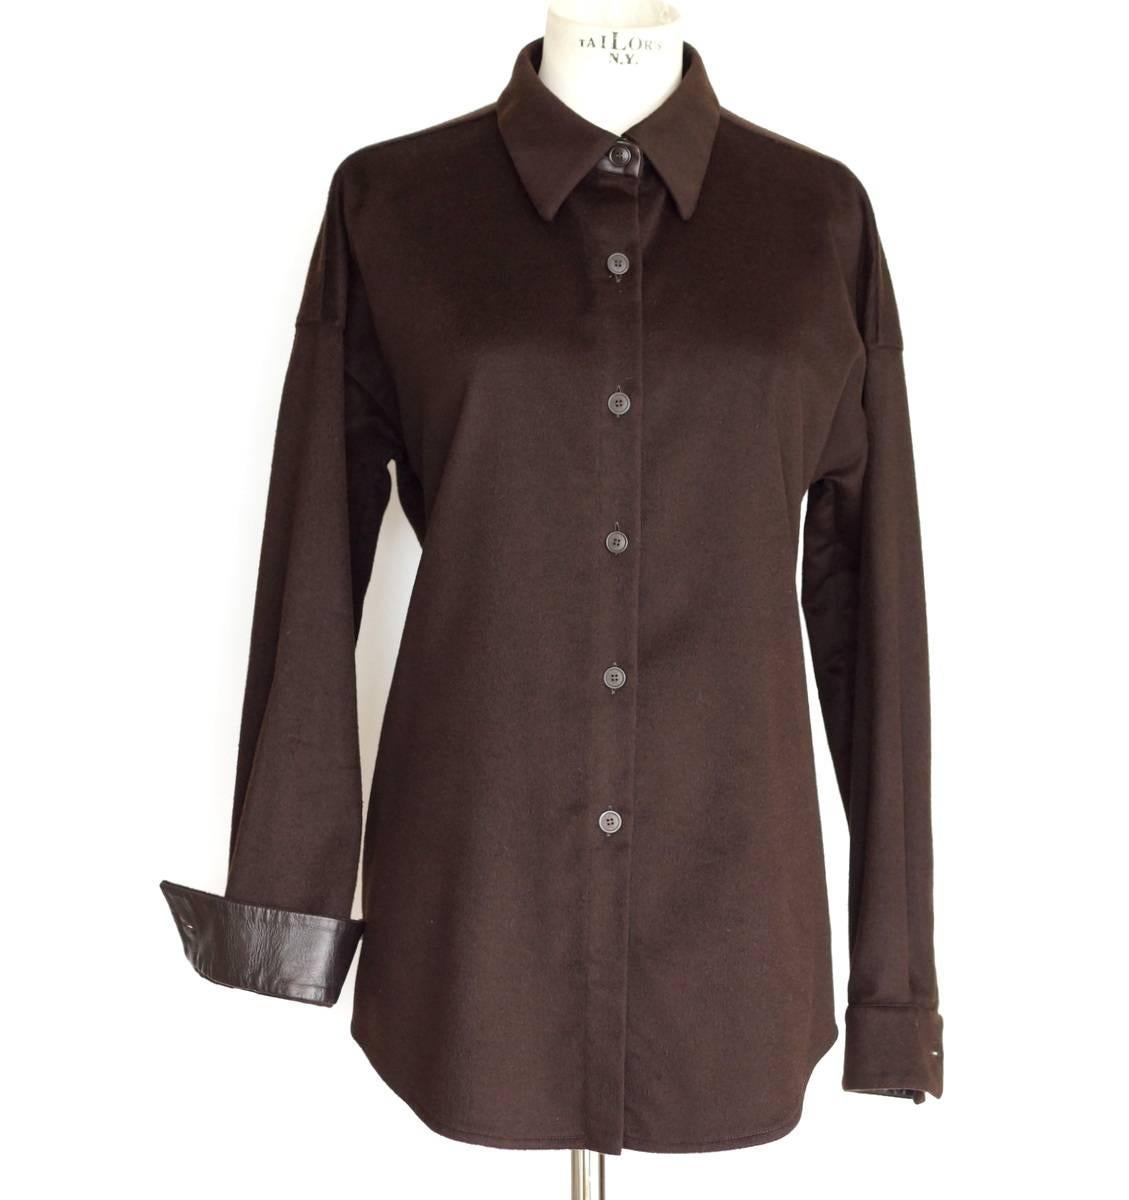 Agnona Shirt Cashmere and Leather Details Rich Chocolate Brown 46 2